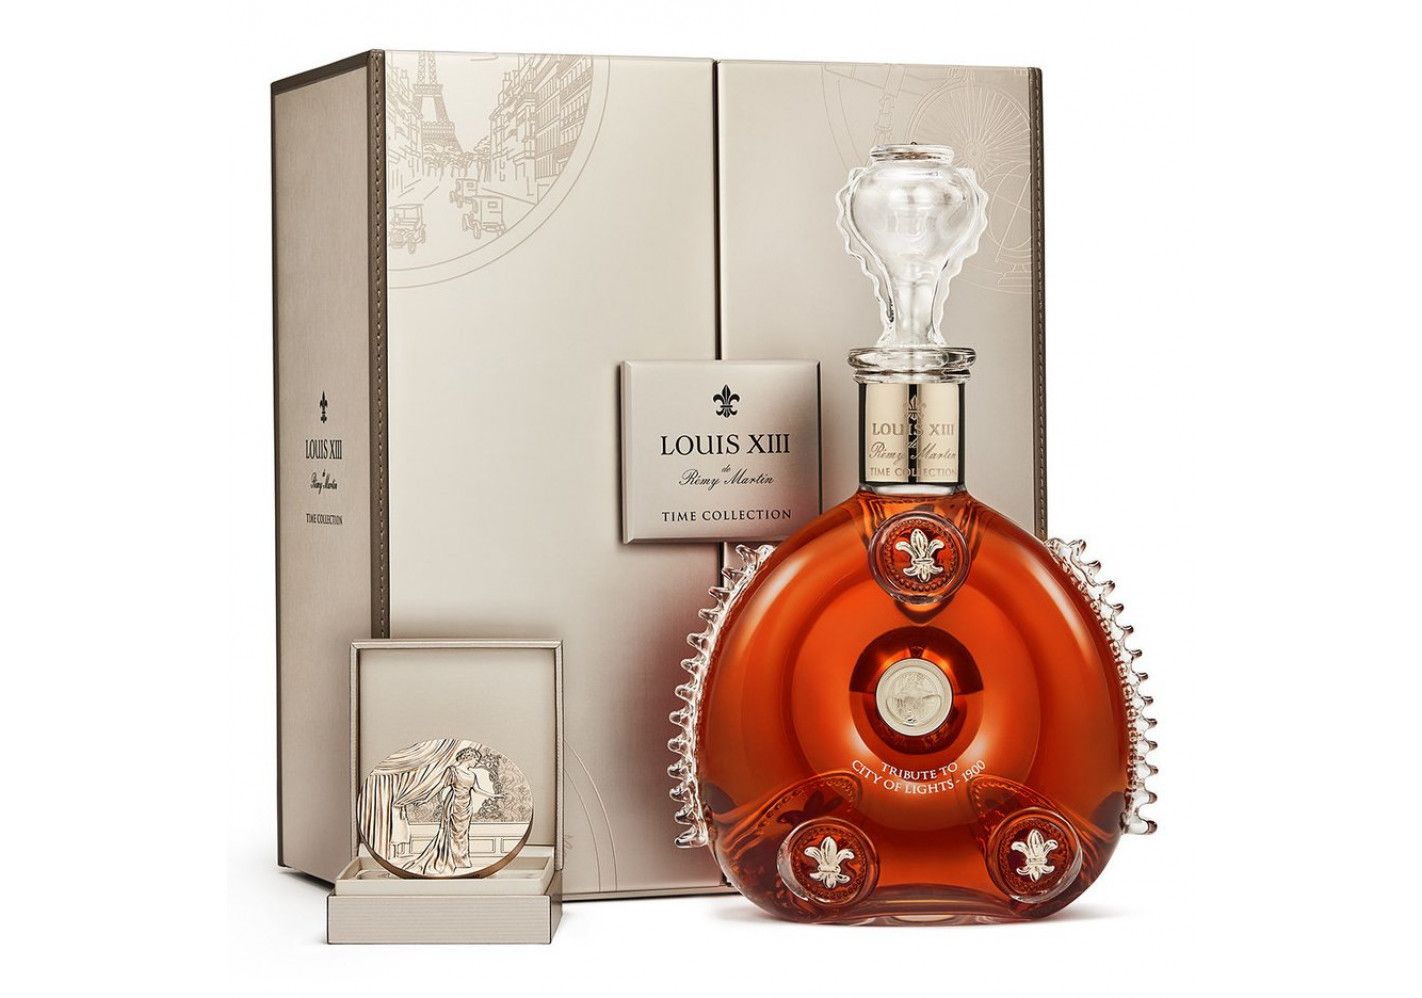 remy-martin-louis-xiii-time-collection-cognac.jpg